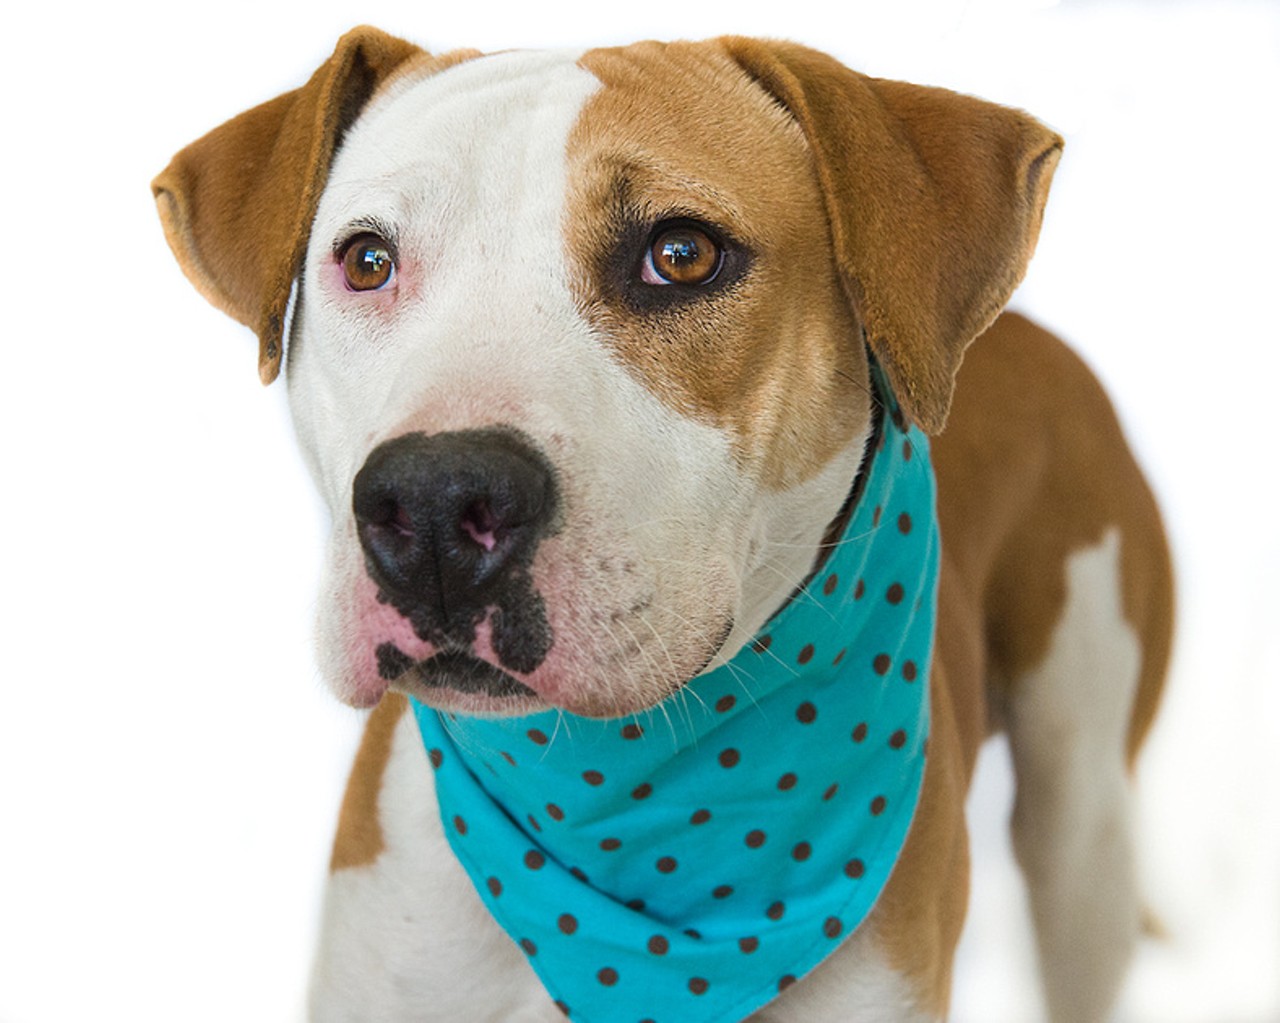 22 sweet photos of adoptable dogs at Orange County Animal Services